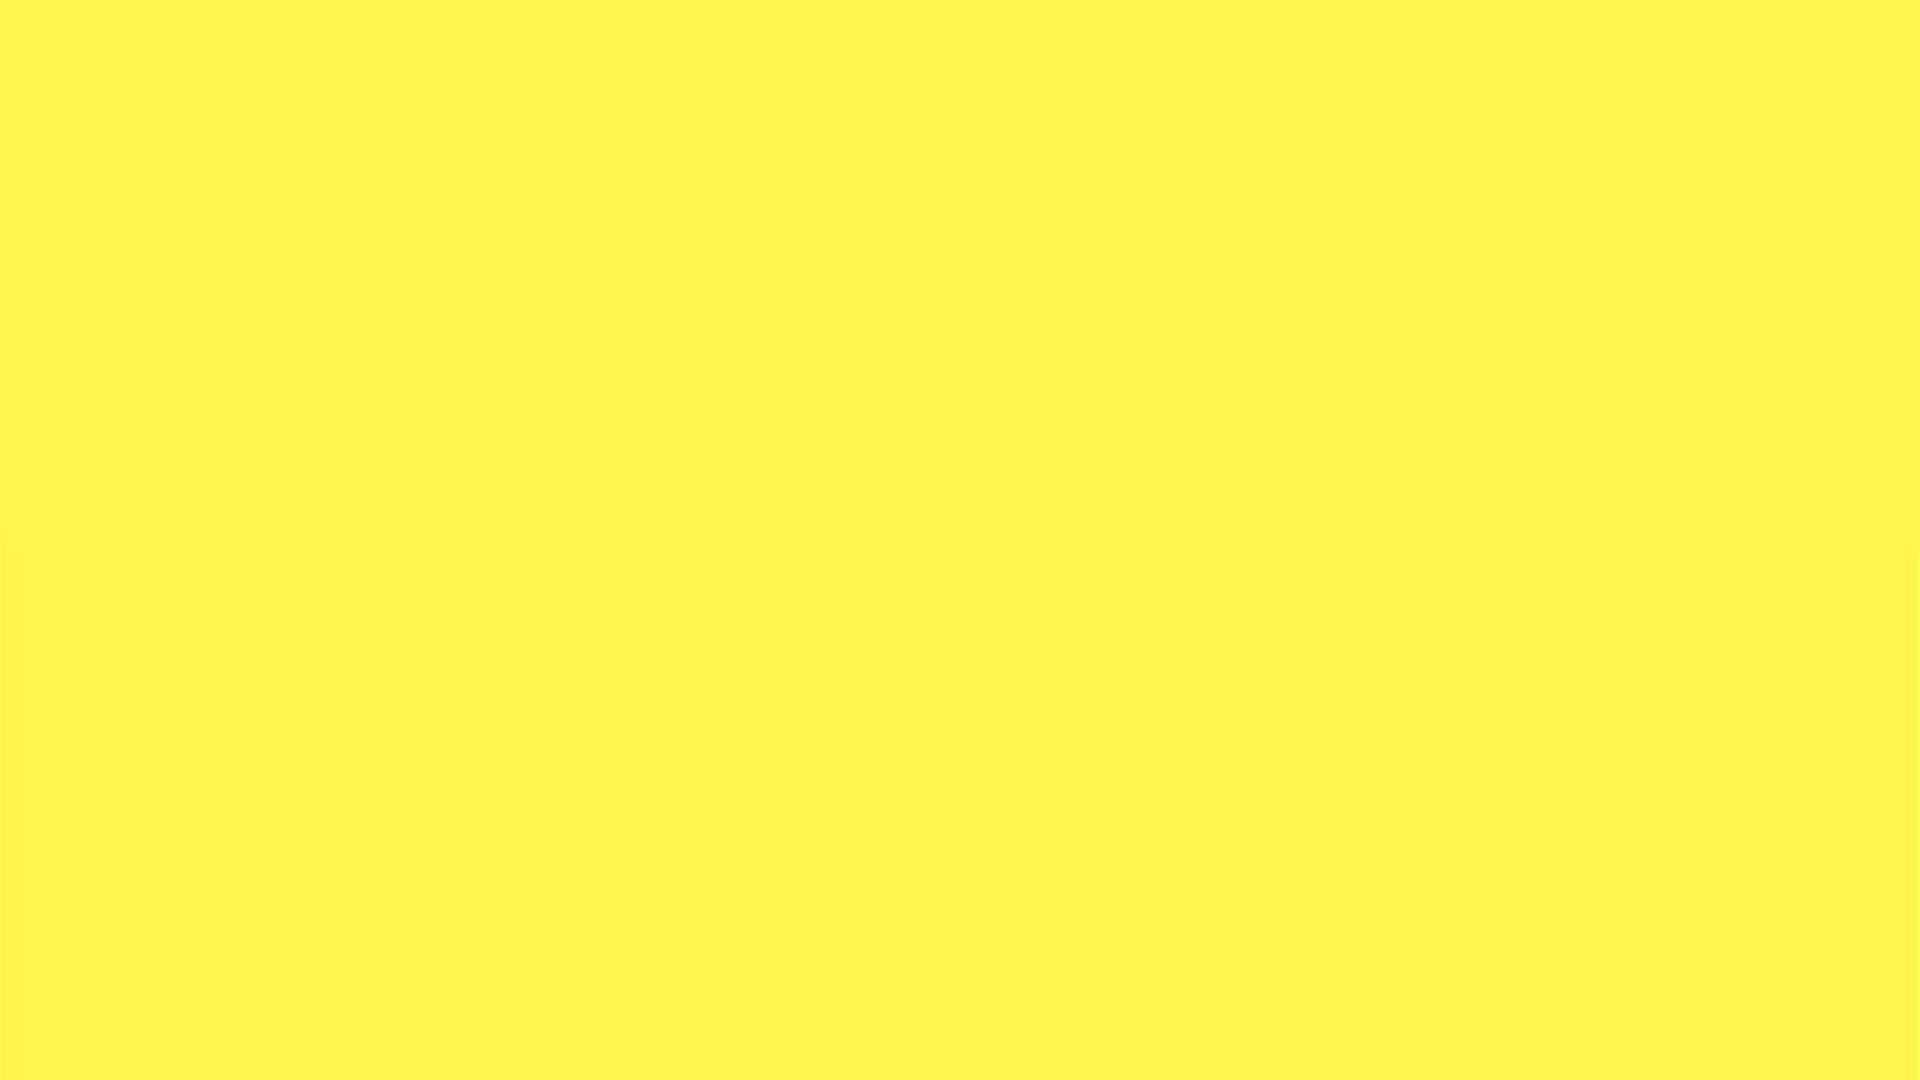 Computer Wallpapers Plain Yellow with resolution 1920X1080 pixel. You can use this wallpaper as background for your desktop Computer Screensavers, Android or iPhone smartphones